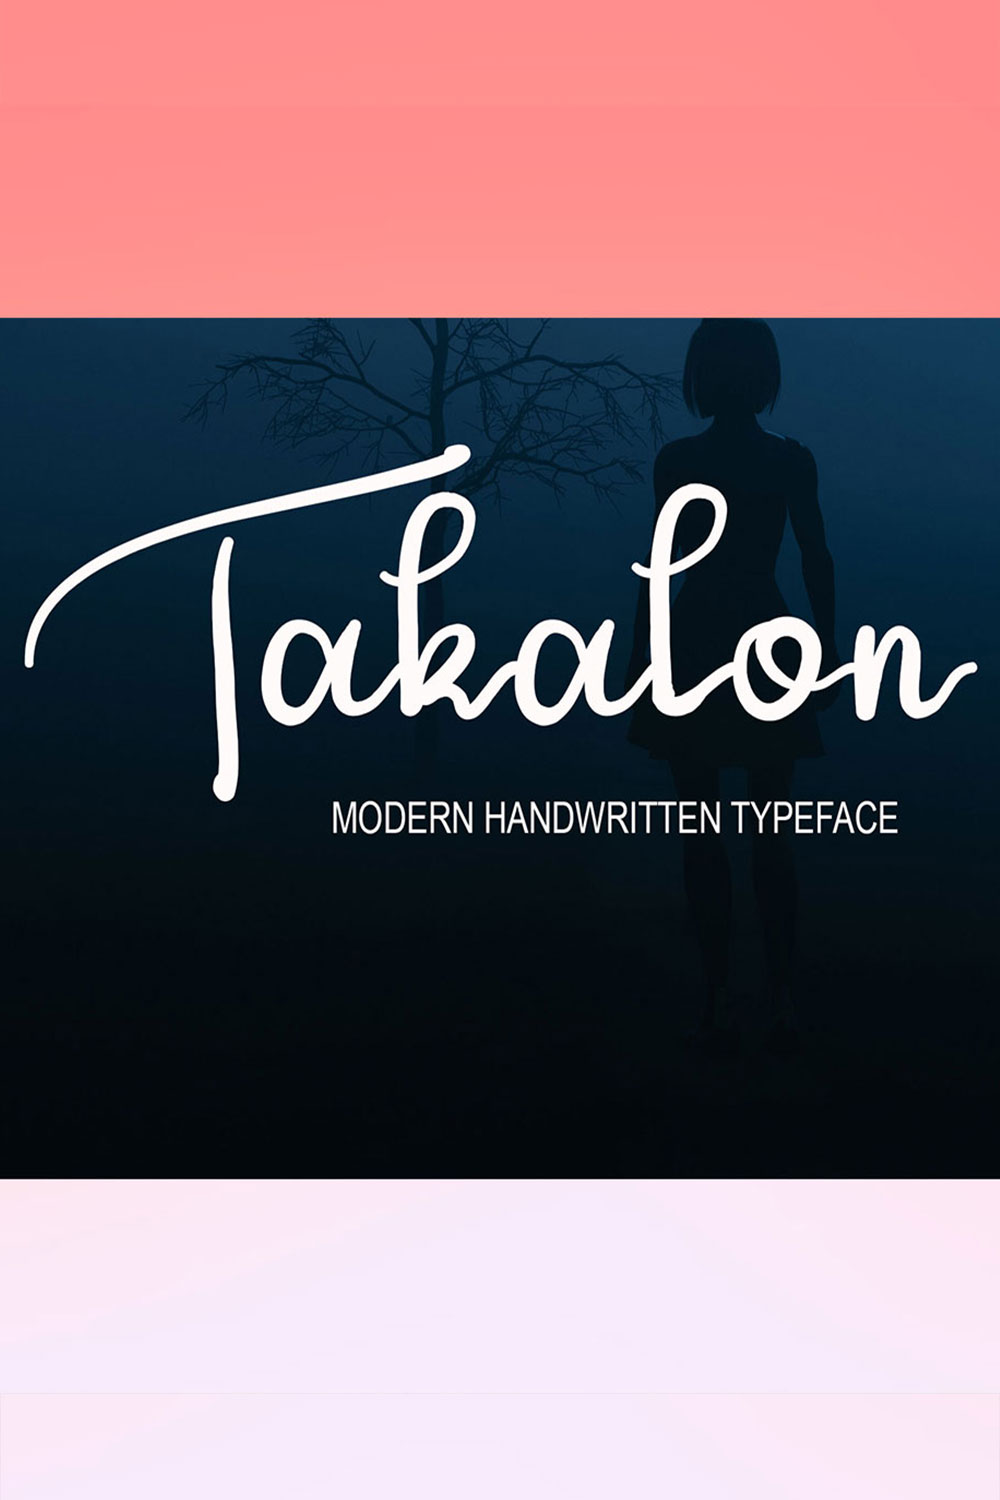 An image with text showing off the charming Takalon font